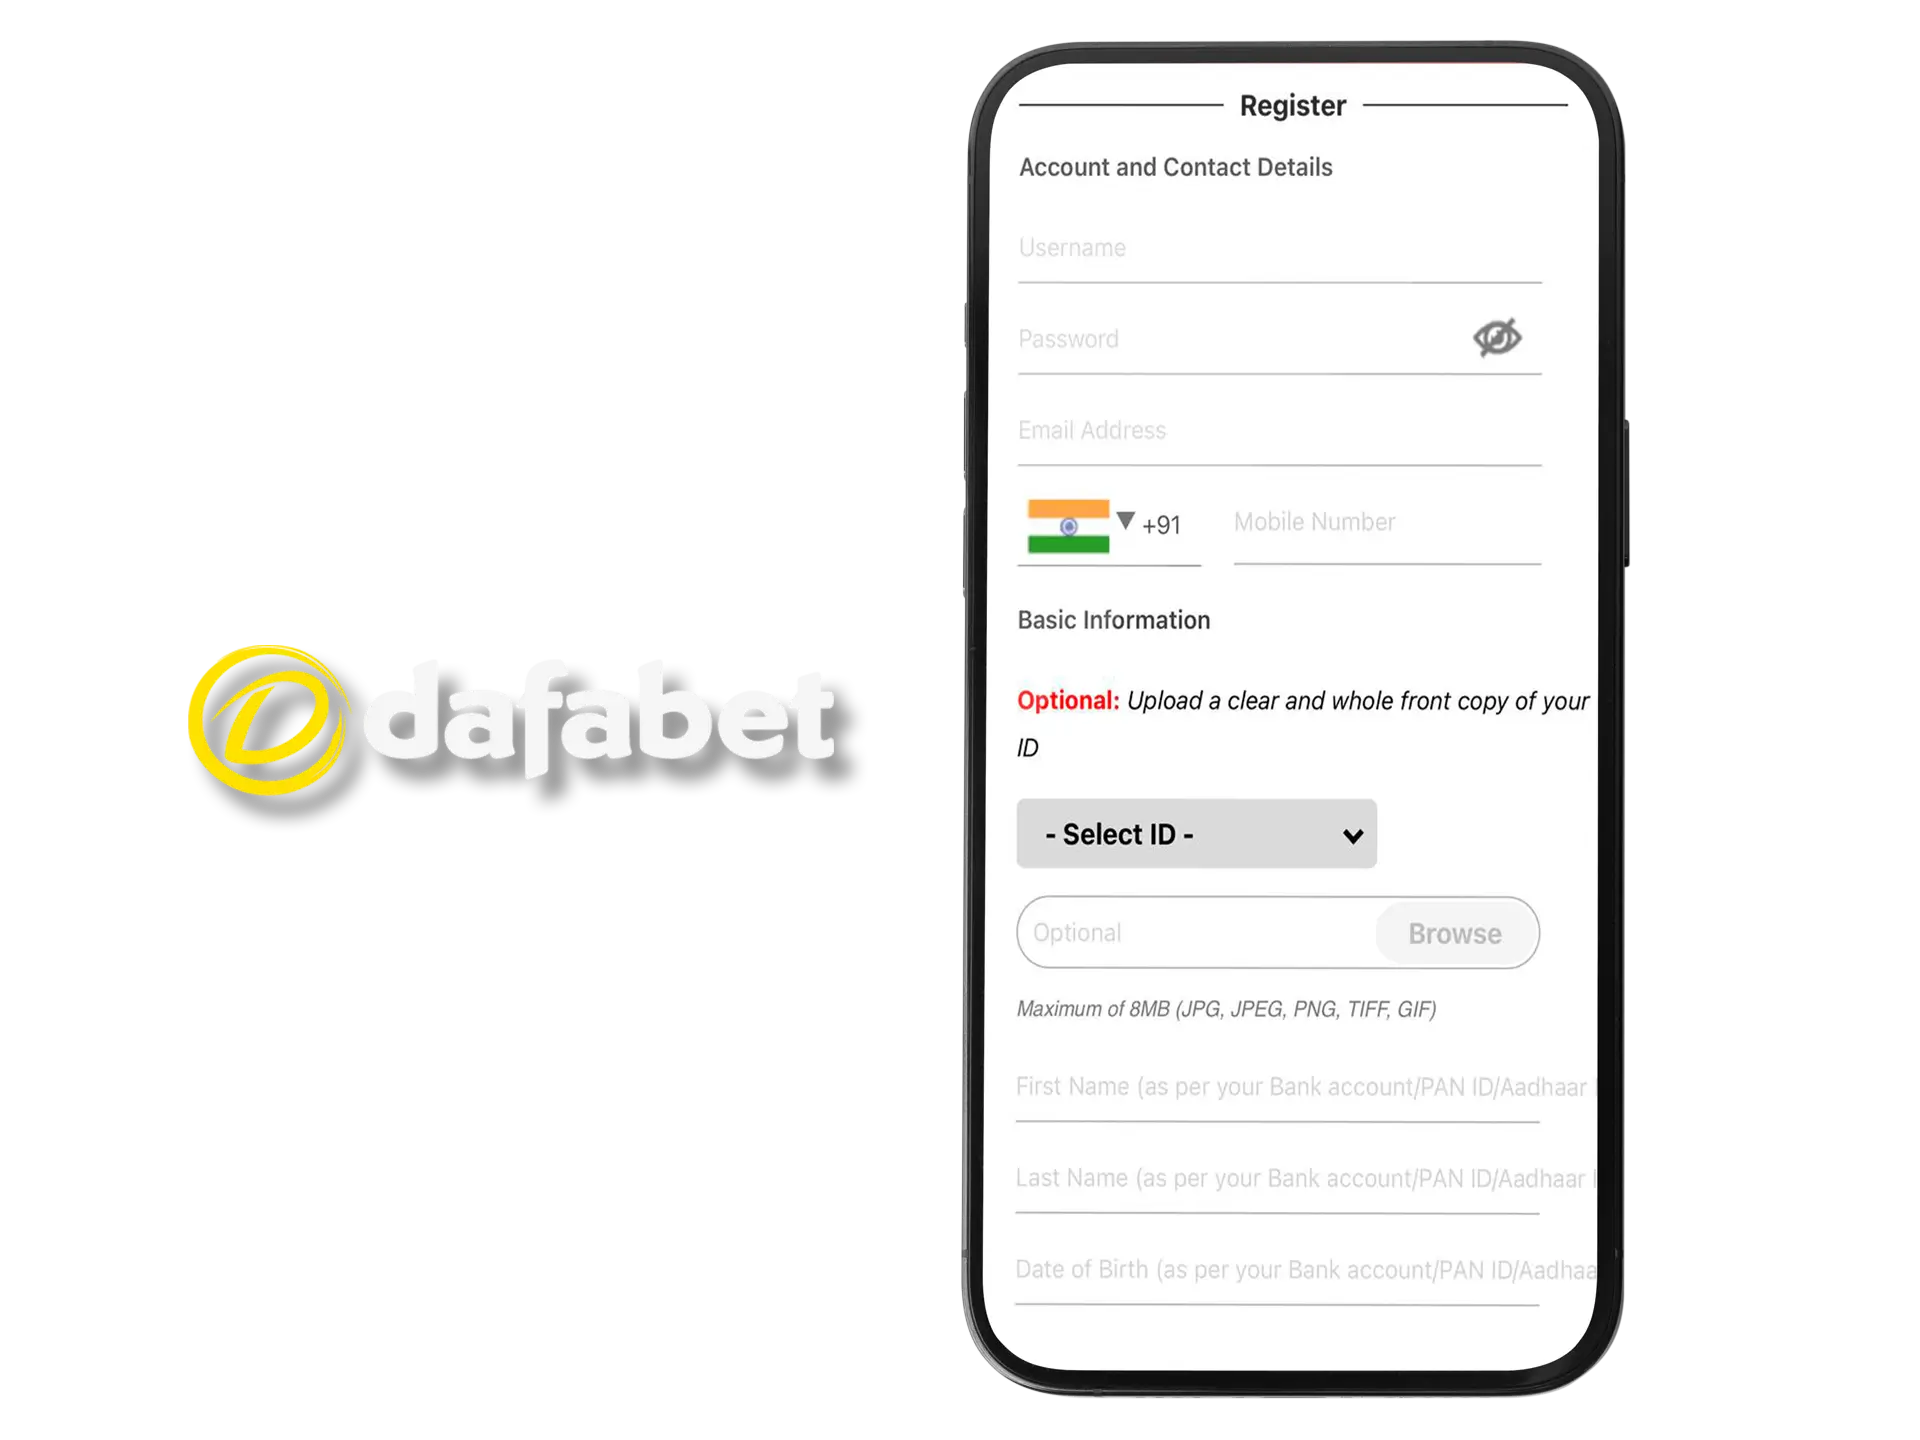 Carefully fill in and verify your details to create an account with Dafabet.